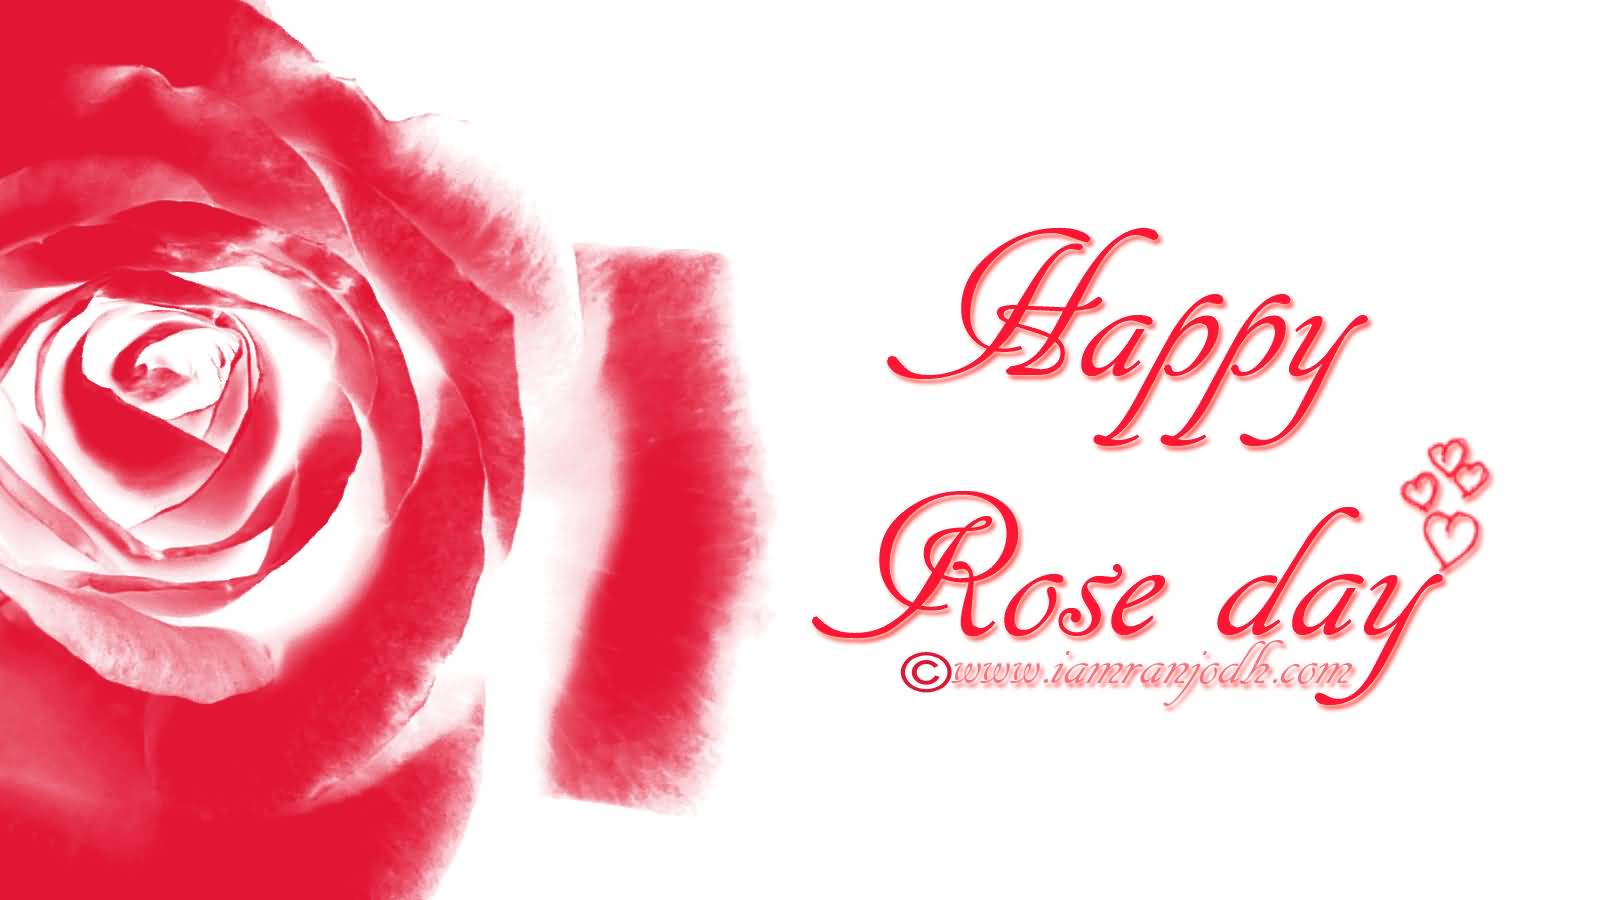 Adorable Rose Day Greeting Pictures And Image